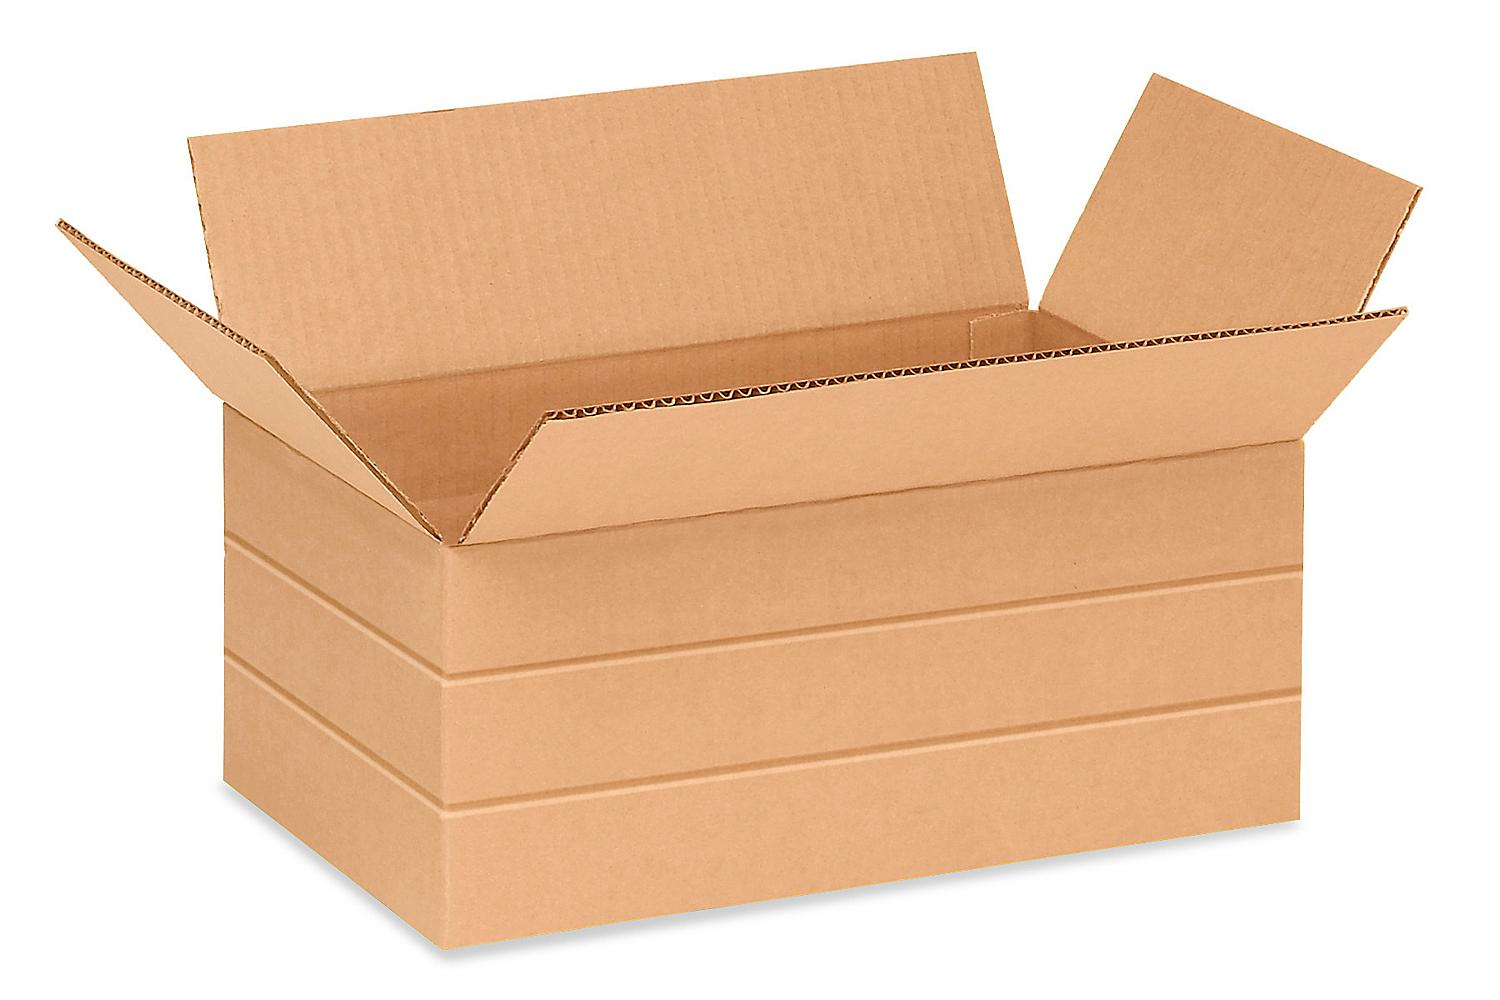 25 ULINE 8" x 8" x 9" 200# Corrugated Packing & Shipping Boxes ~FREE SHIPPING~